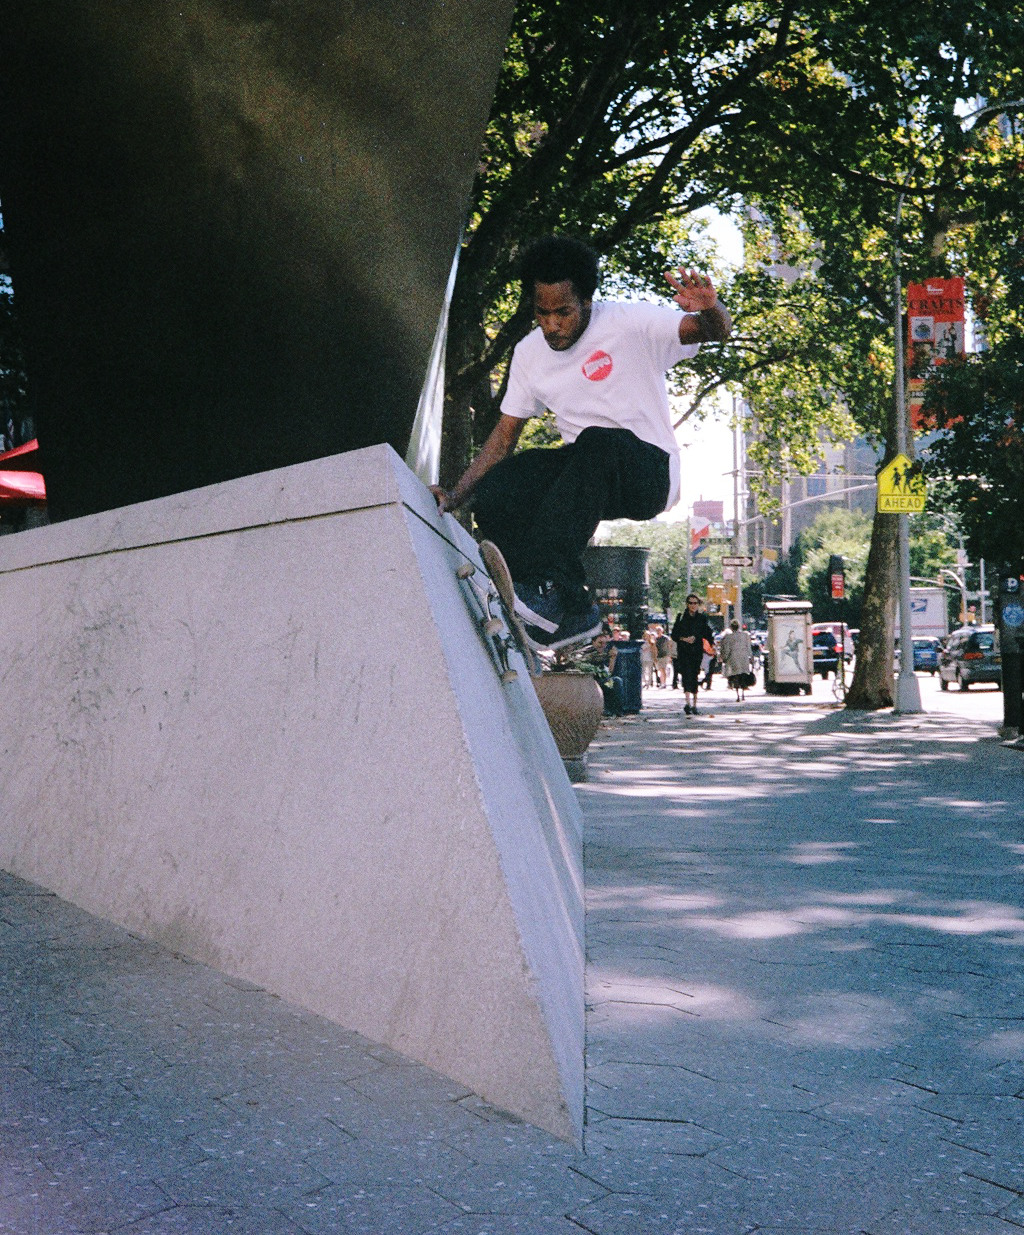   F-side wall ride at Lincoln Center, NYC-Photo: Stewart  